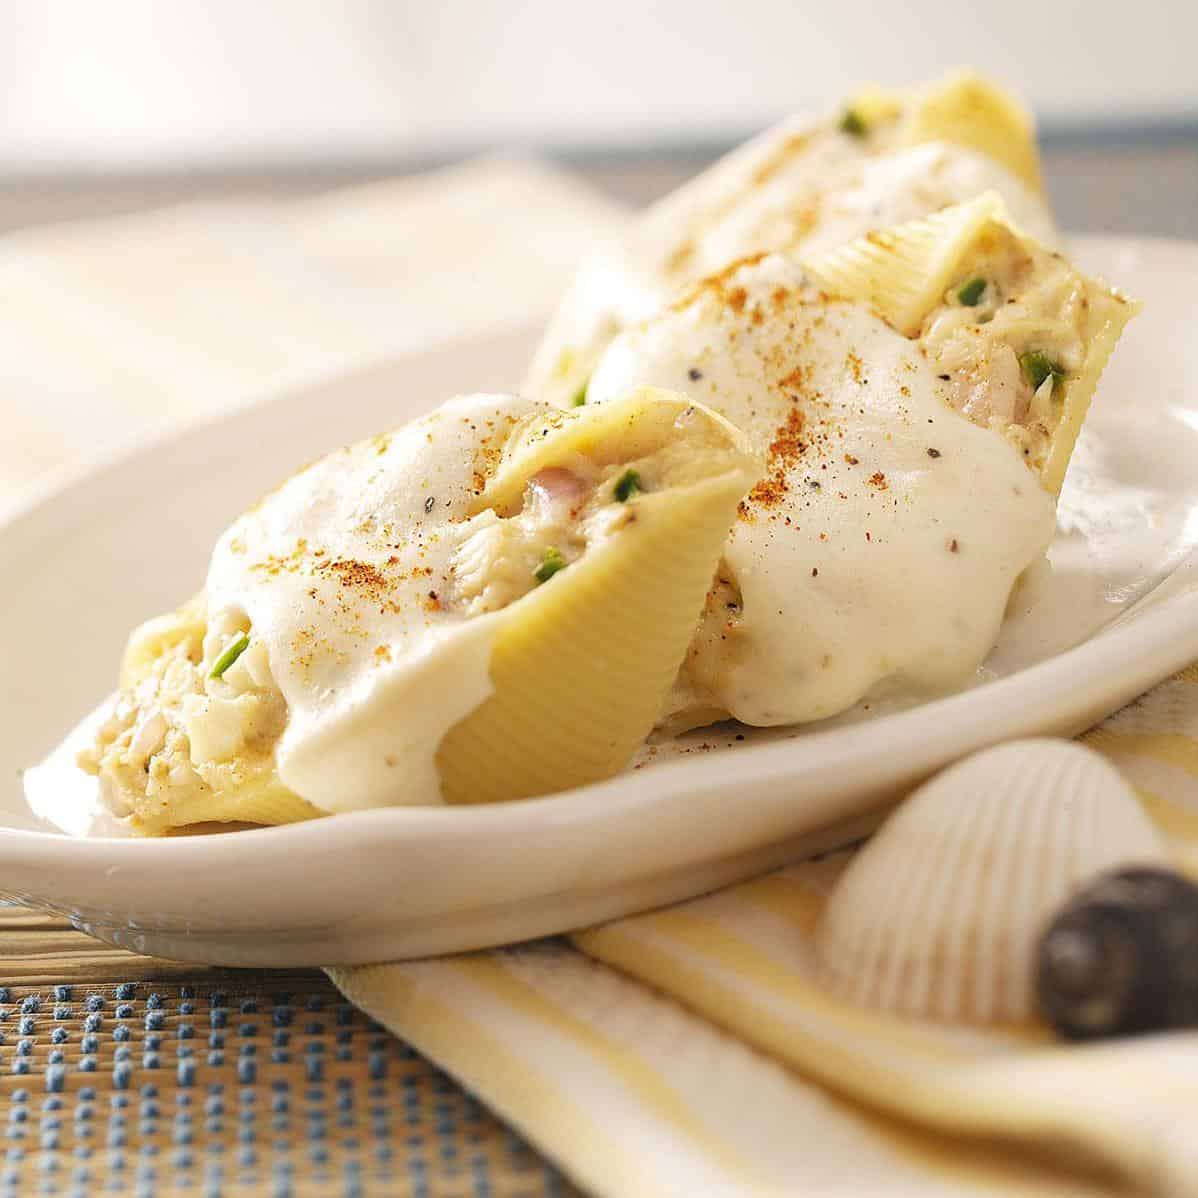  Creamy and delicious, with a little kick of spice!